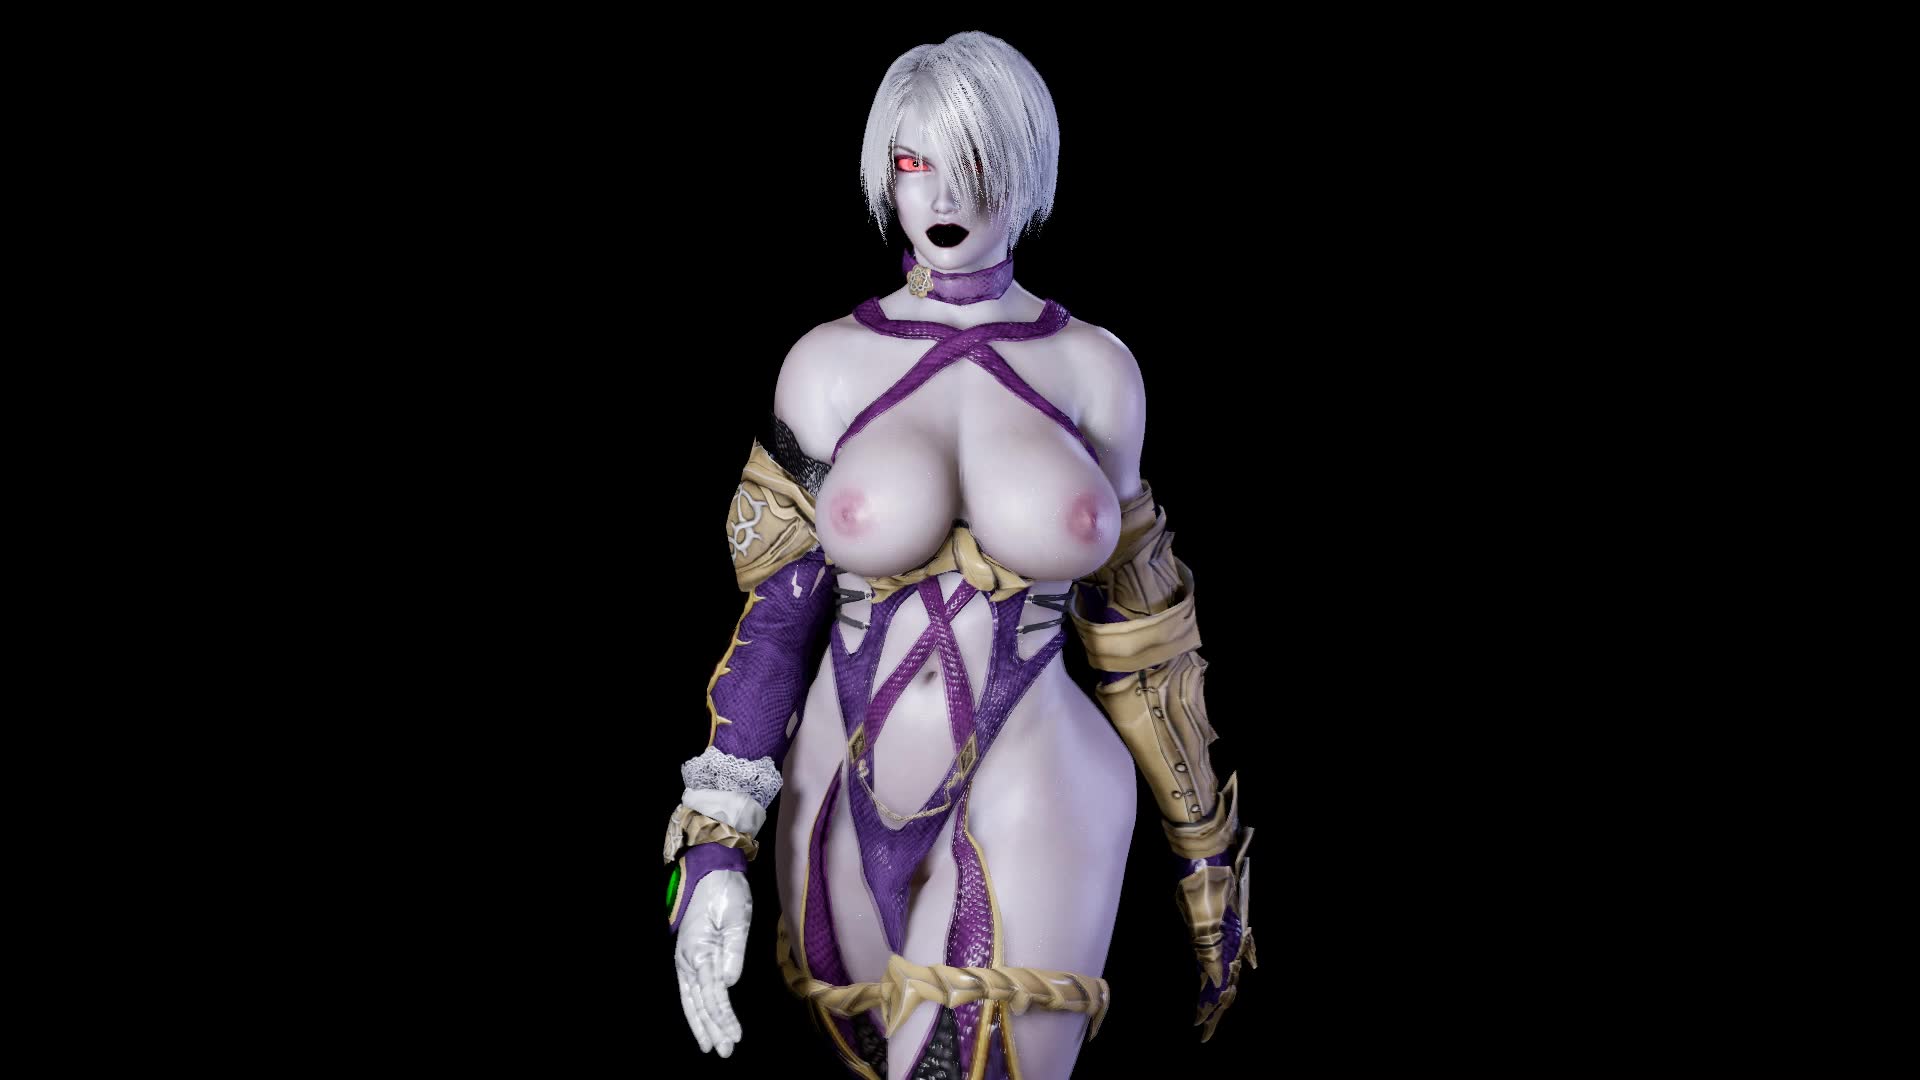 Isabella Valentine Walking And Showing Off Bouncy Boobs Jiggling Ass – Soul Calibur NSFW animation thumbnail